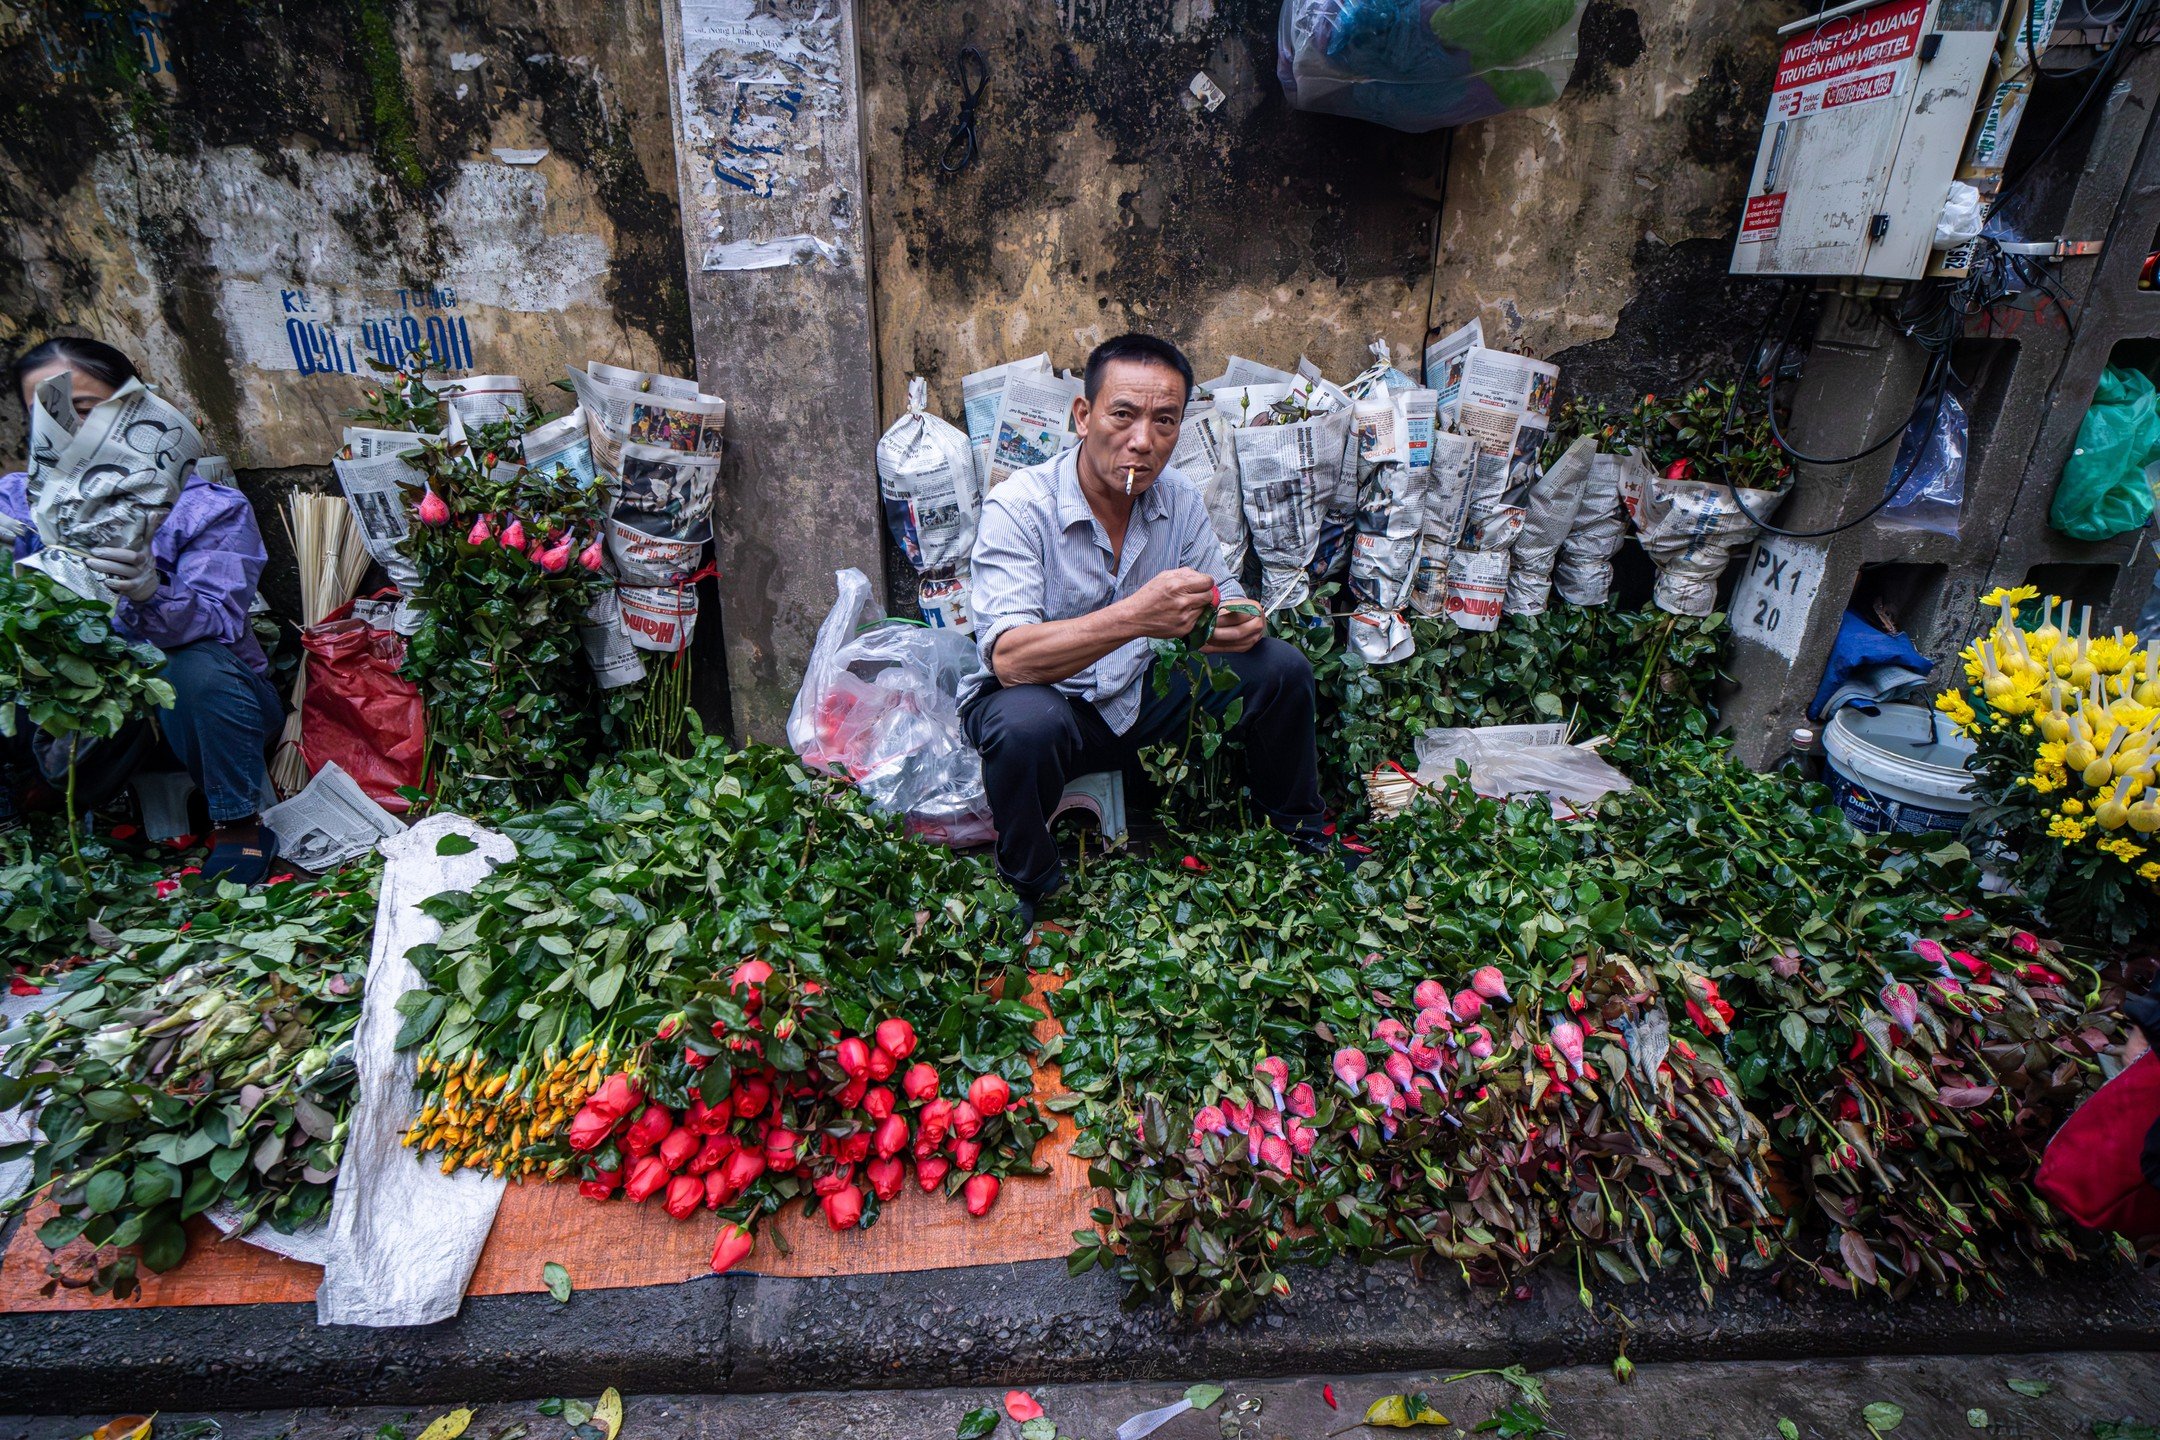 Our favourite way to explore a city is to head into the local markets and get lost amongst the colour and chaos of the stalls and traders. 

Long Bien Market in Hanoi&rsquo;s Old Quarter is full of fruit and vegetables, live fish and animals and lots